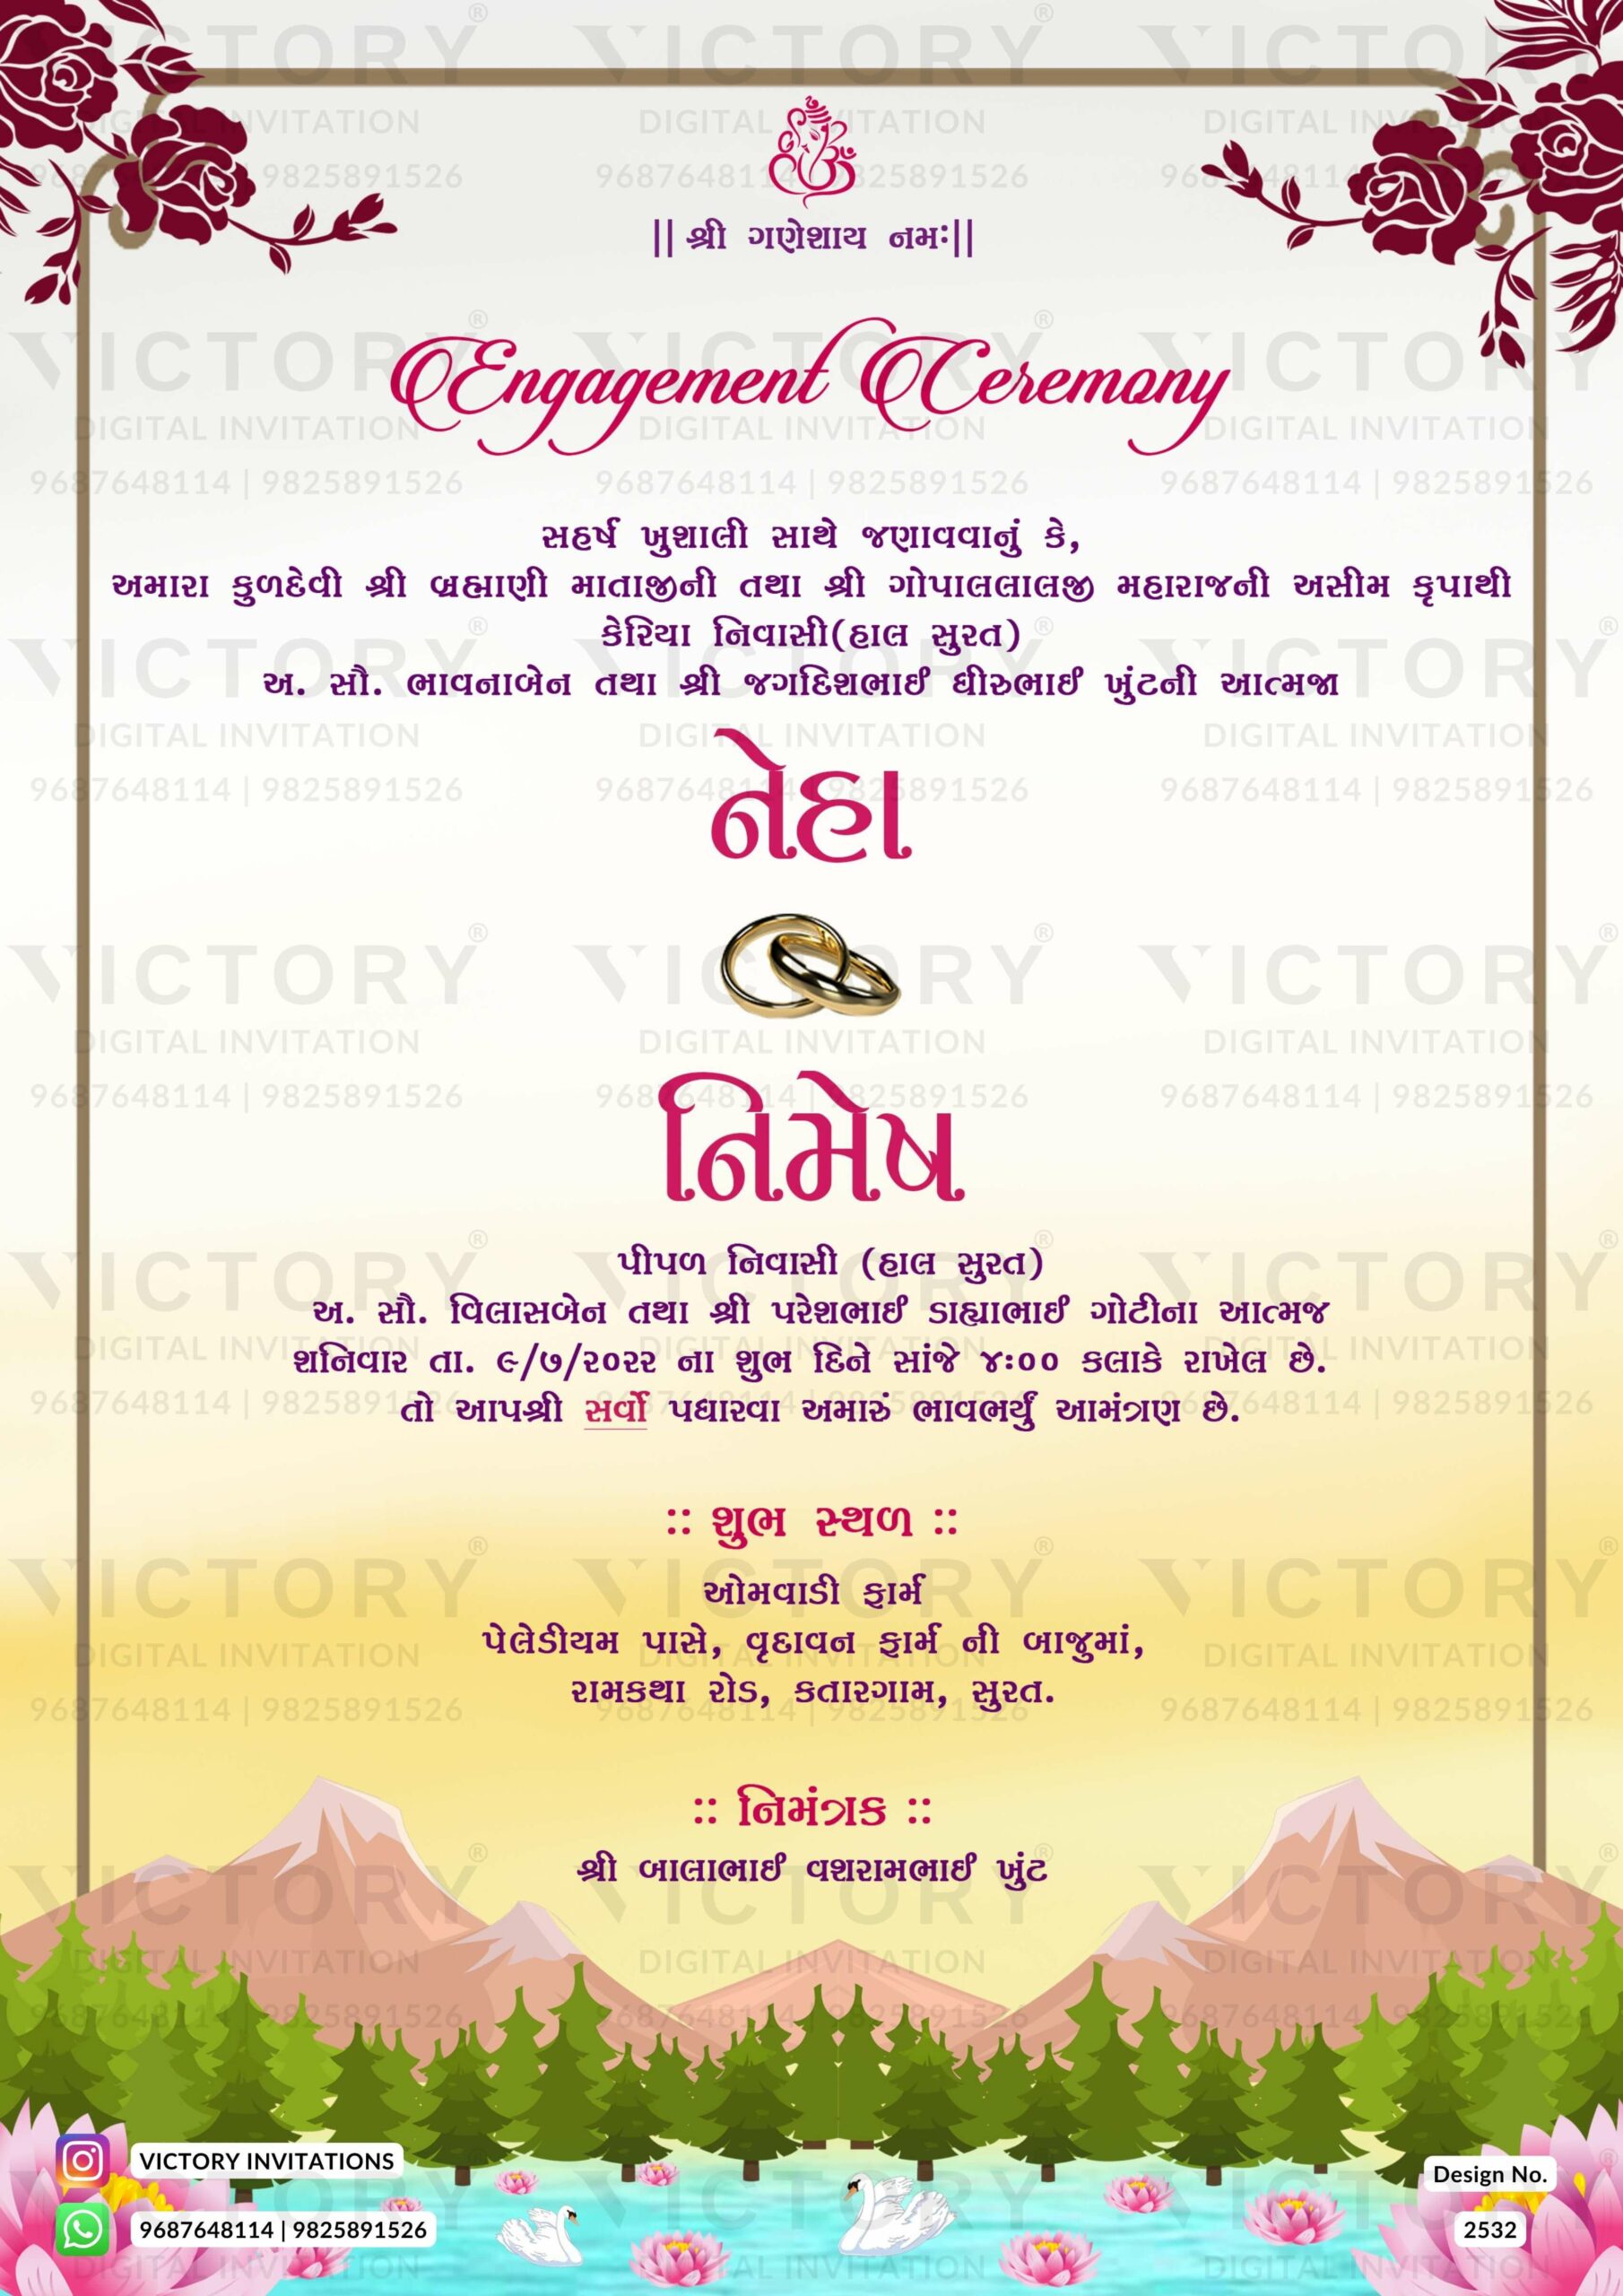 Kannada Engagement Invitation Card With Lotus In Pink Theme – SeeMyMarriage